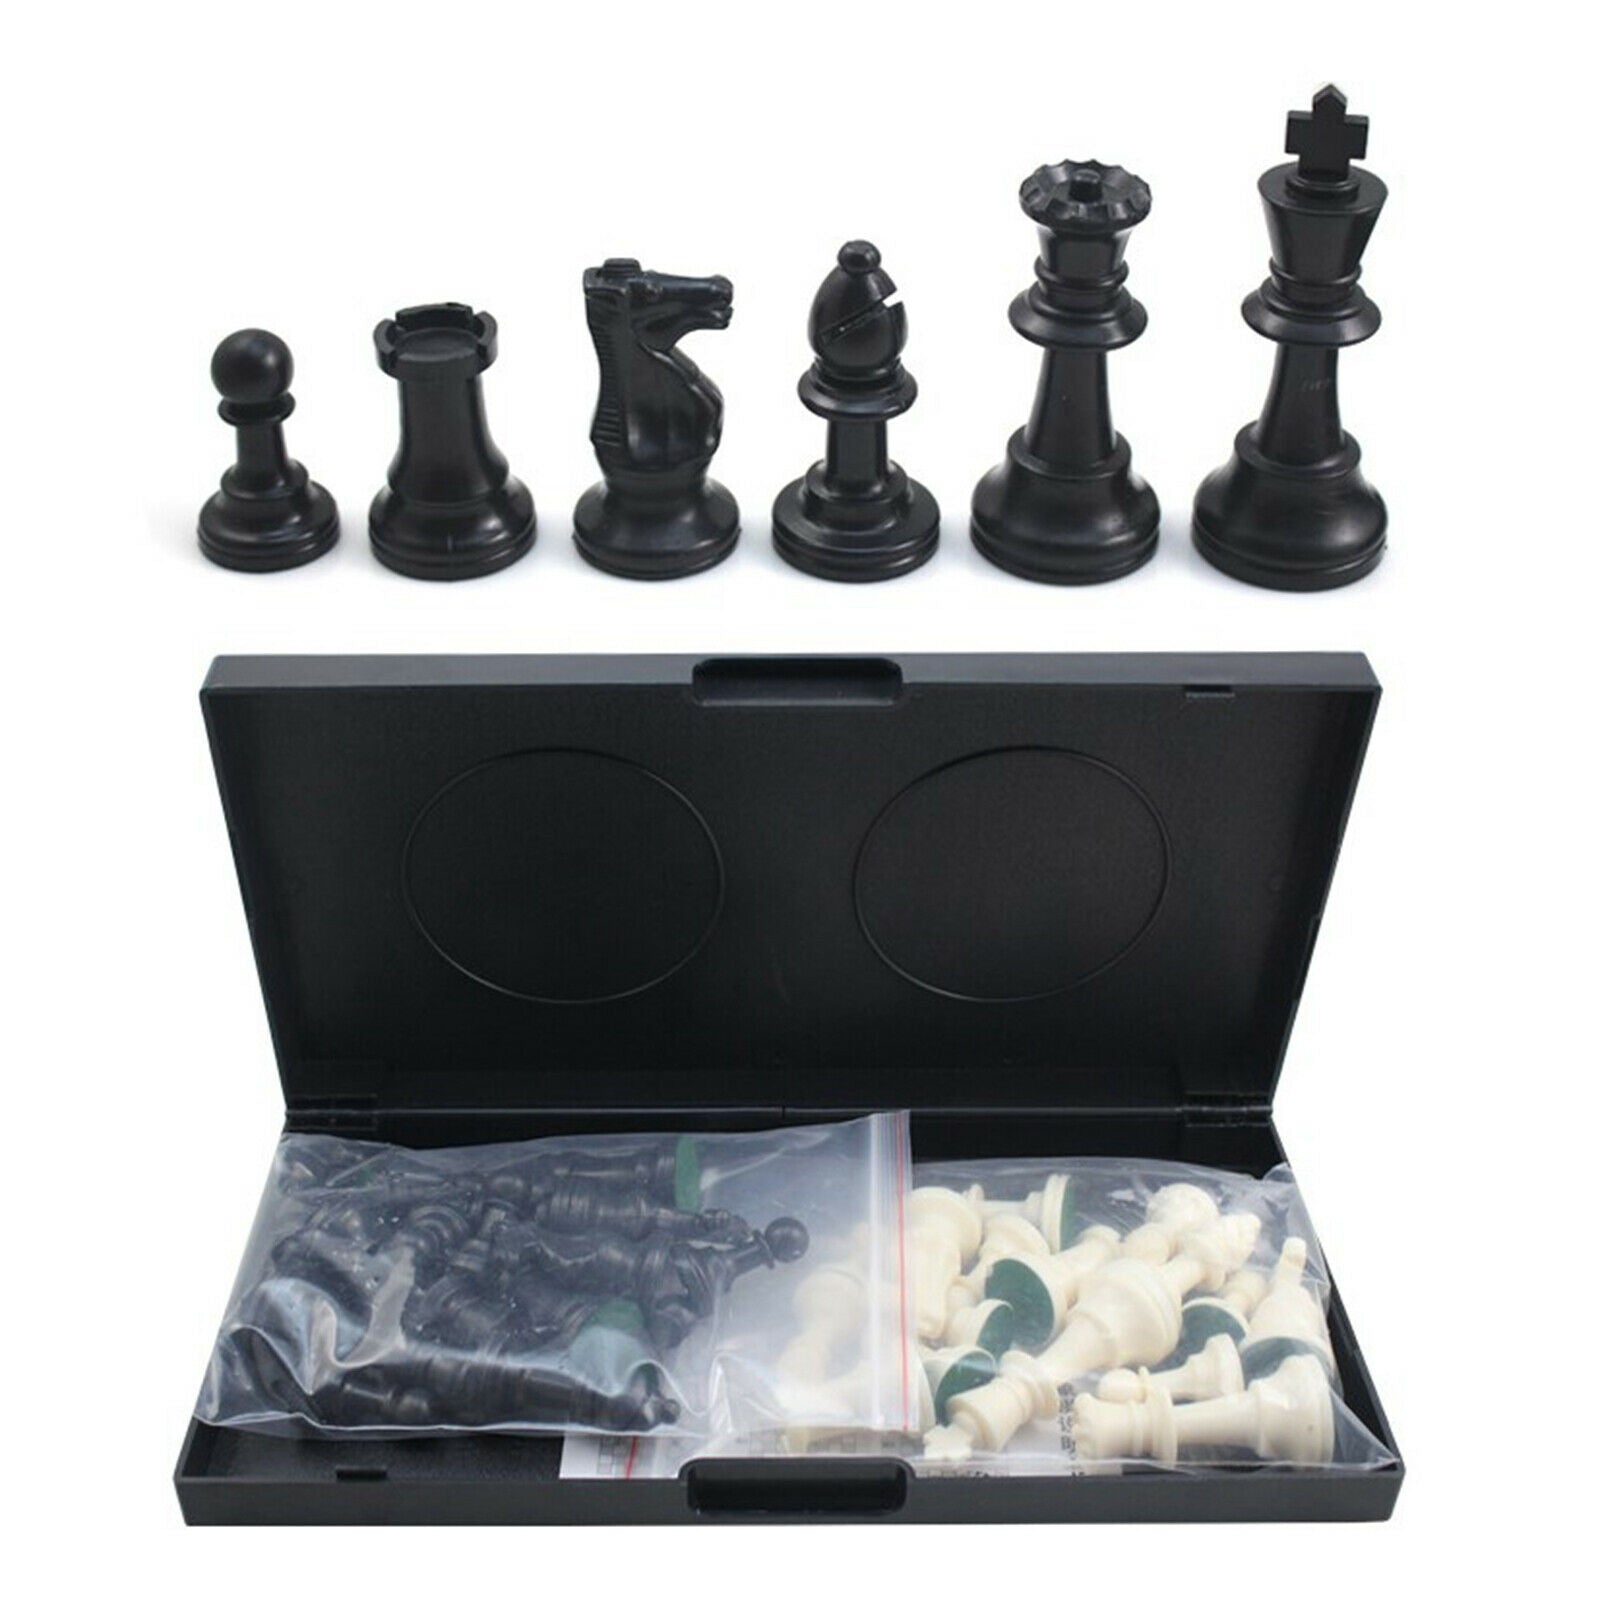 Portable 15"x15" Chess Set Magnetic Chess Pieces King Queen Board Game